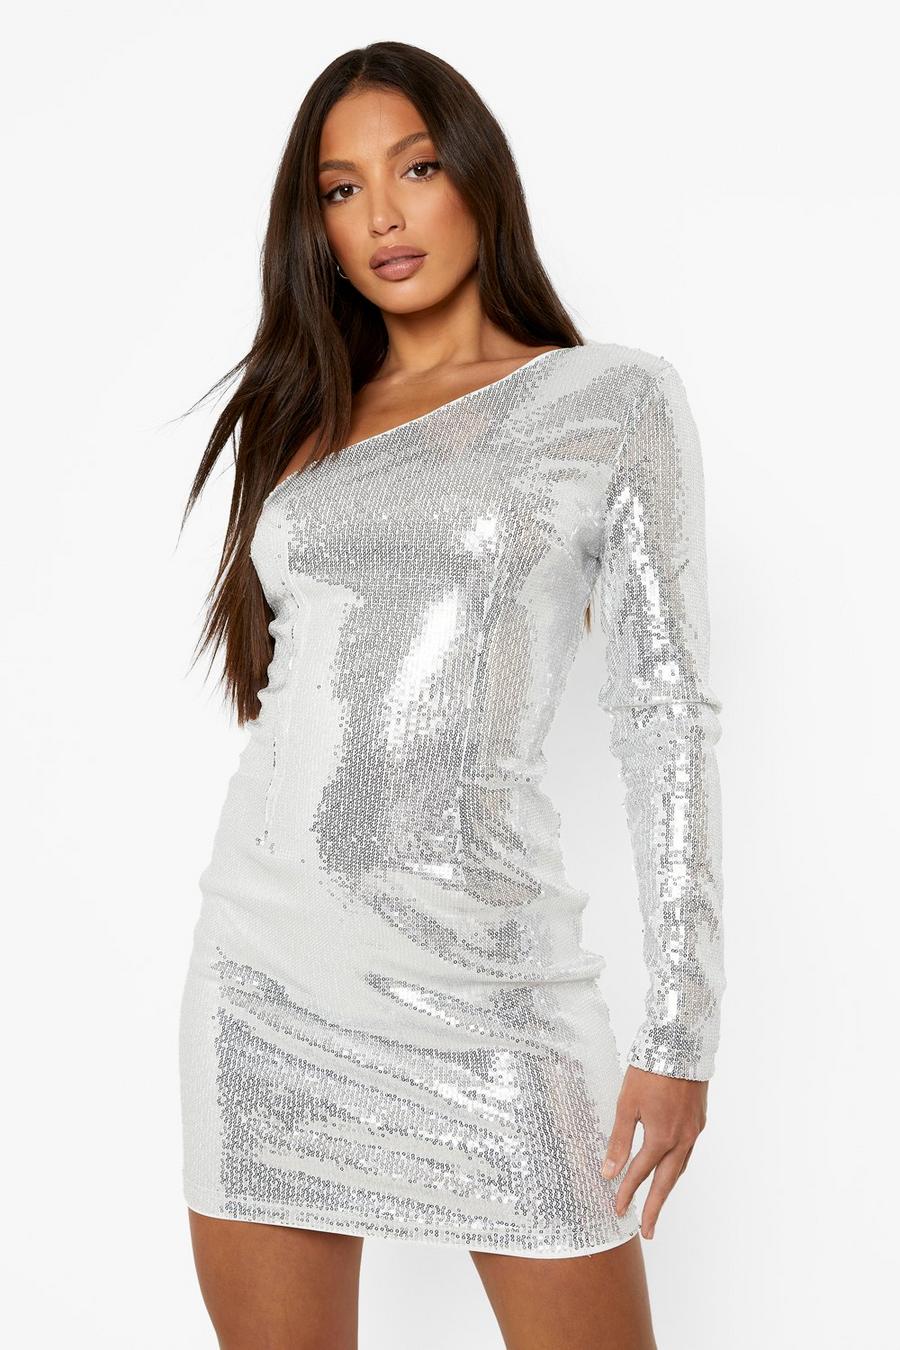 Silver Tall One Shoulder Bodycon Sequin Dress